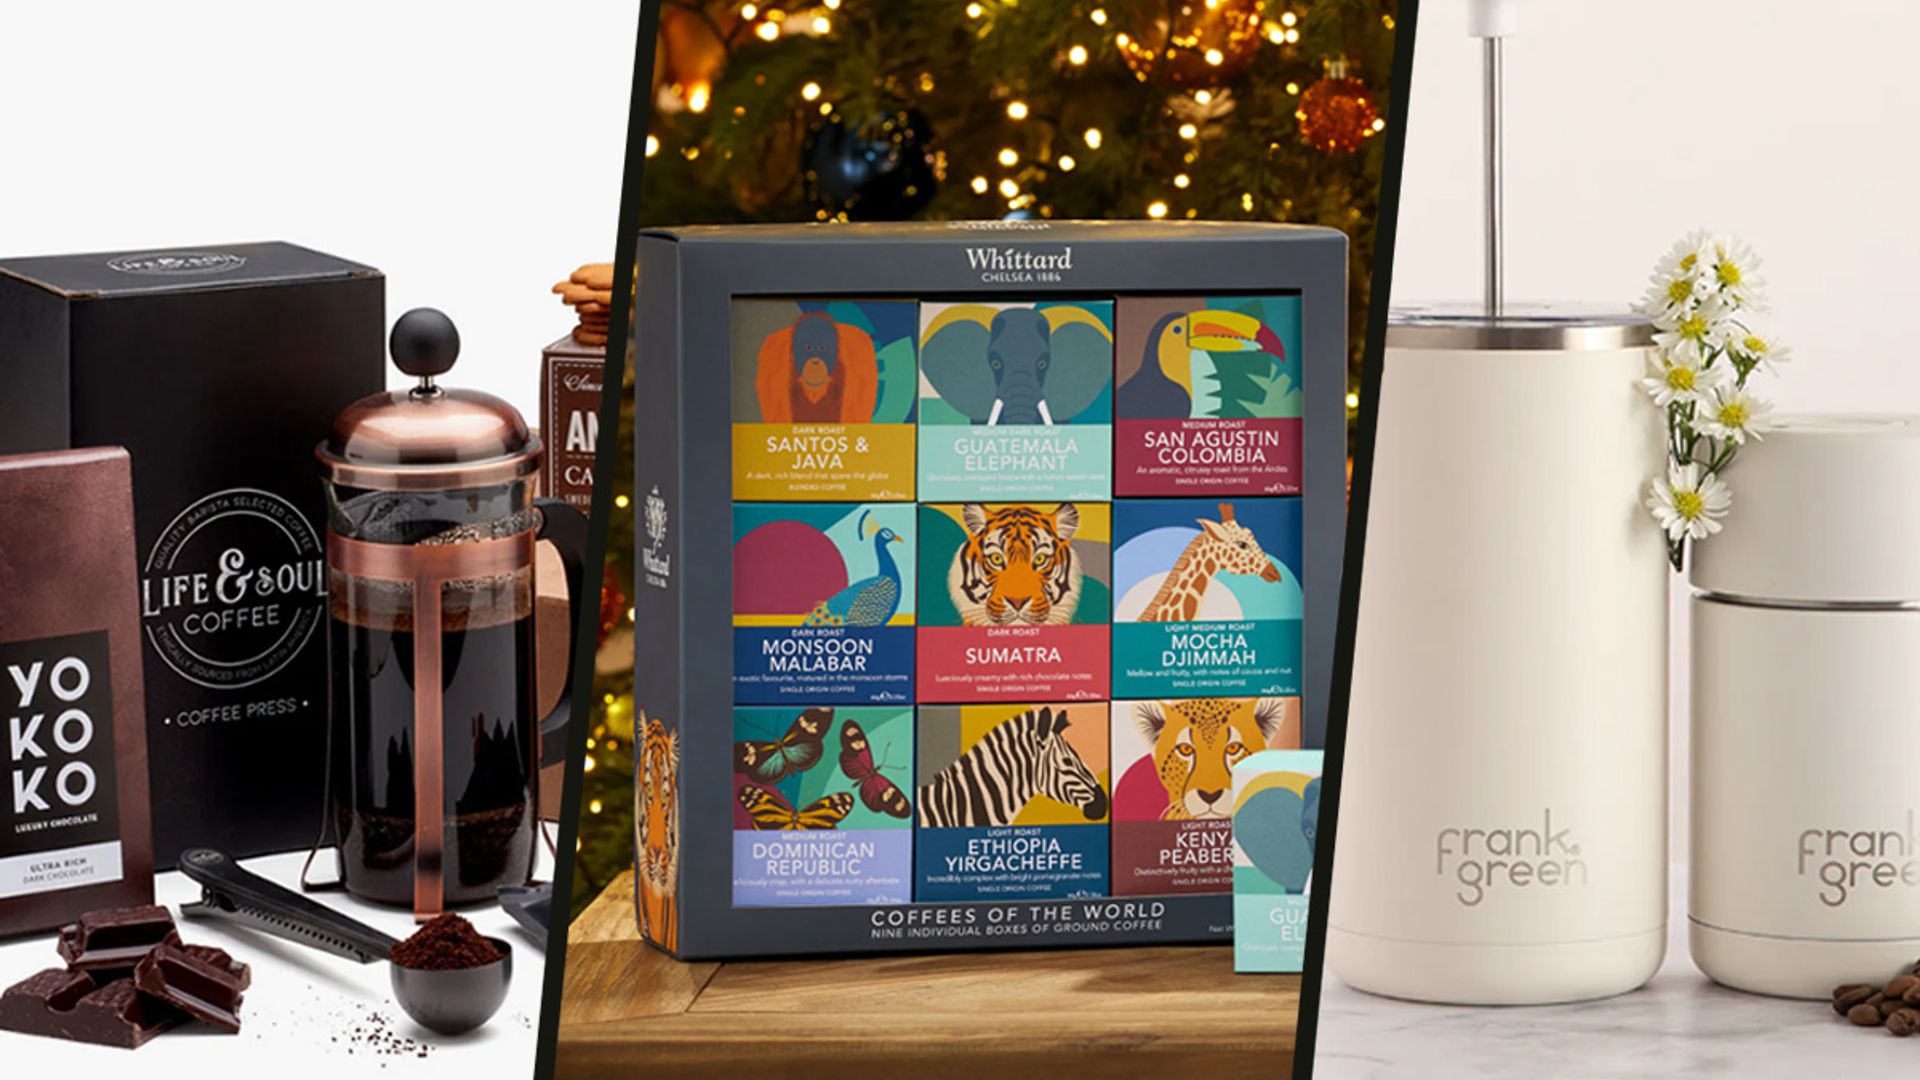 12 gifts for coffee lovers for last minute presents